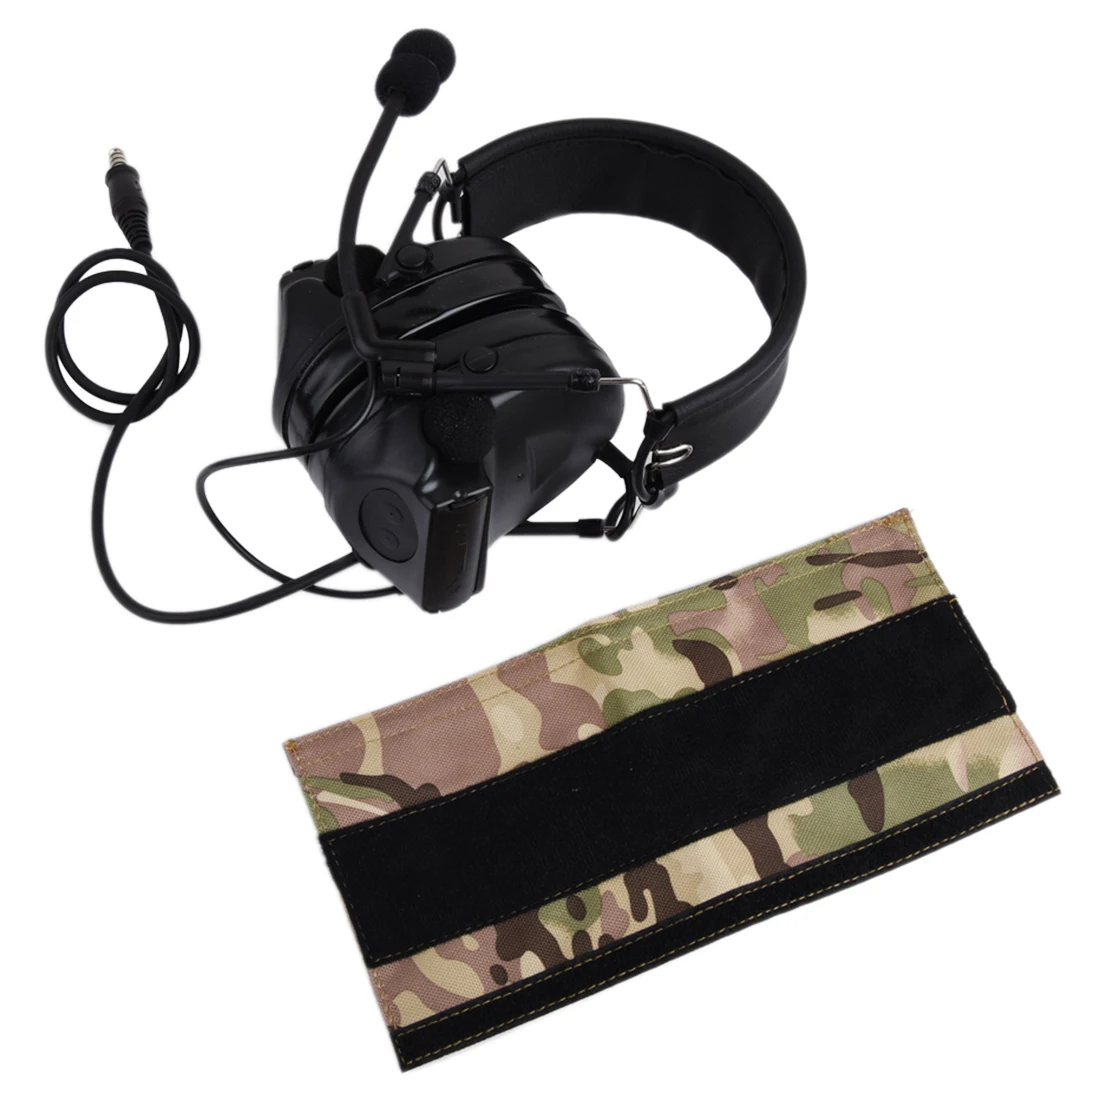 

Z-TAC Comtac II Tactical Headset Anti-noise Noise Reduction Earmuffs Hearing Protection - Black